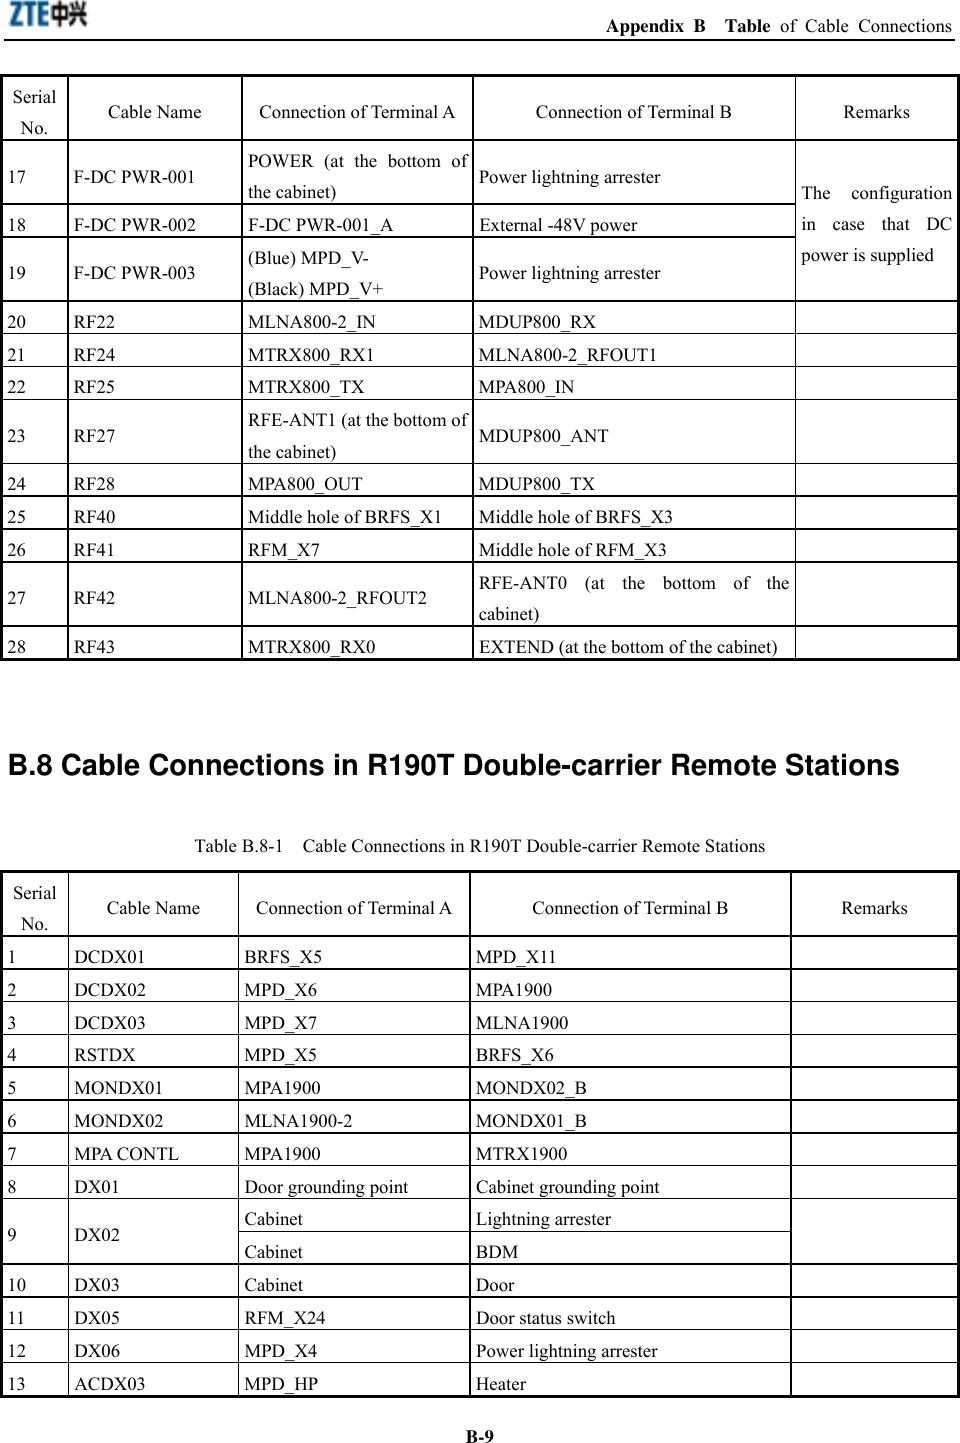  Appendix B  Table of Cable Connections  B-9Serial No.  Cable Name  Connection of Terminal A Connection of Terminal B  Remarks 17 F-DC PWR-001  POWER (at the bottom of the cabinet)  Power lightning arrester 18  F-DC PWR-002  F-DC PWR-001_A  External -48V power 19 F-DC PWR-003  (Blue) MPD_V- (Black) MPD_V+  Power lightning arrester The configuration in case that DC power is supplied 20 RF22  MLNA800-2_IN  MDUP800_RX   21 RF24  MTRX800_RX1  MLNA800-2_RFOUT1   22 RF25  MTRX800_TX  MPA800_IN   23 RF27  RFE-ANT1 (at the bottom of the cabinet)  MDUP800_ANT  24 RF28  MPA800_OUT  MDUP800_TX   25  RF40  Middle hole of BRFS_X1  Middle hole of BRFS_X3   26  RF41  RFM_X7  Middle hole of RFM_X3   27 RF42  MLNA800-2_RFOUT2  RFE-ANT0 (at the bottom of the cabinet)   28  RF43  MTRX800_RX0  EXTEND (at the bottom of the cabinet)    B.8 Cable Connections in R190T Double-carrier Remote Stations Table B.8-1    Cable Connections in R190T Double-carrier Remote Stations Serial No.  Cable Name  Connection of Terminal A Connection of Terminal B  Remarks 1 DCDX01  BRFS_X5  MPD_X11   2 DCDX02  MPD_X6  MPA1900   3 DCDX03  MPD_X7  MLNA1900   4 RSTDX  MPD_X5  BRFS_X6   5 MONDX01  MPA1900  MONDX02_B   6 MONDX02  MLNA1900-2  MONDX01_B   7 MPA CONTL  MPA1900  MTRX1900   8  DX01  Door grounding point  Cabinet grounding point   Cabinet Lightning arrester  9 DX02 Cabinet BDM  10 DX03  Cabinet  Door   11  DX05  RFM_X24  Door status switch   12  DX06  MPD_X4  Power lightning arrester   13 ACDX03  MPD_HP  Heater   